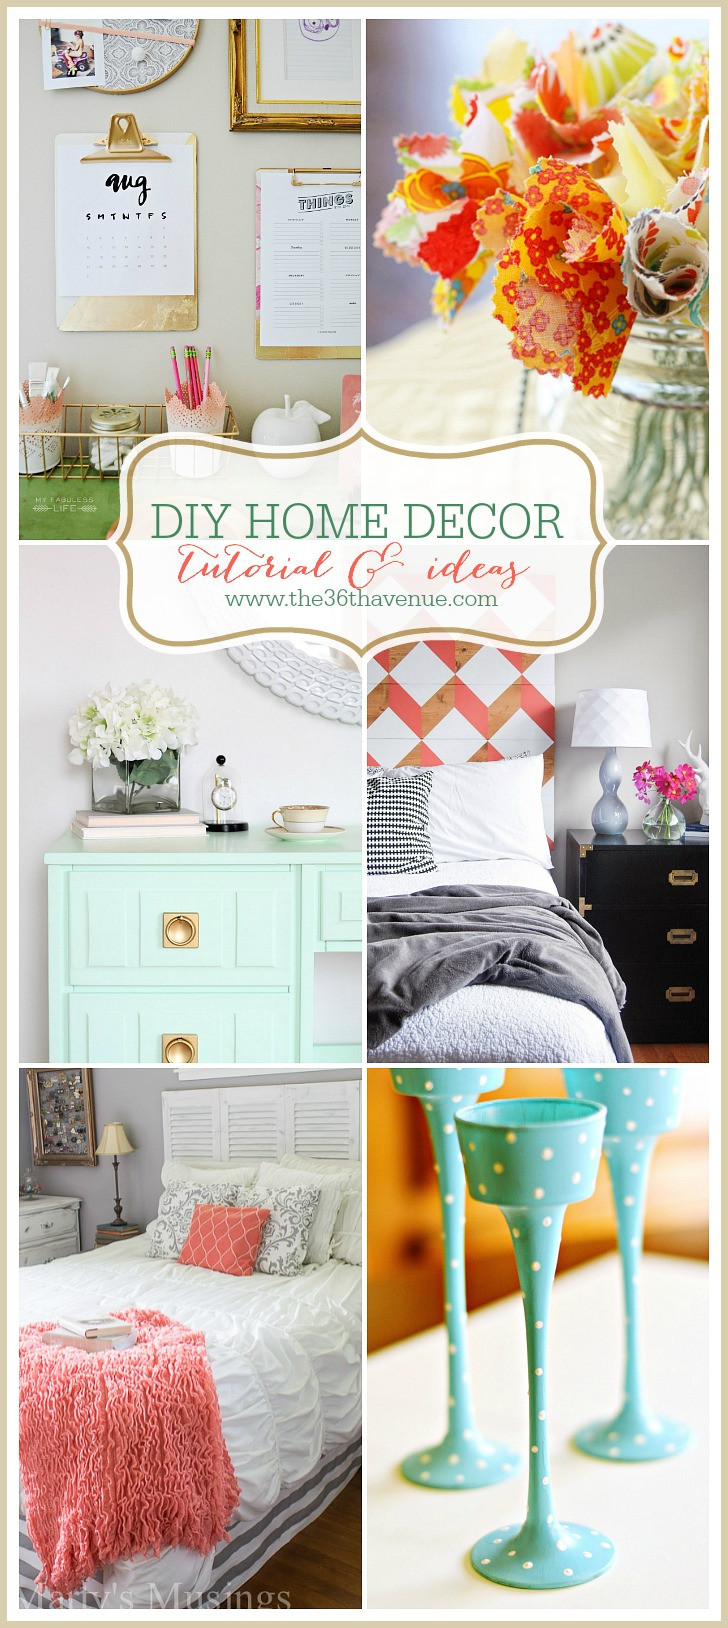 DIY Crafts Ideas For Home Decor
 Home Decor DIY Projects The 36th AVENUE